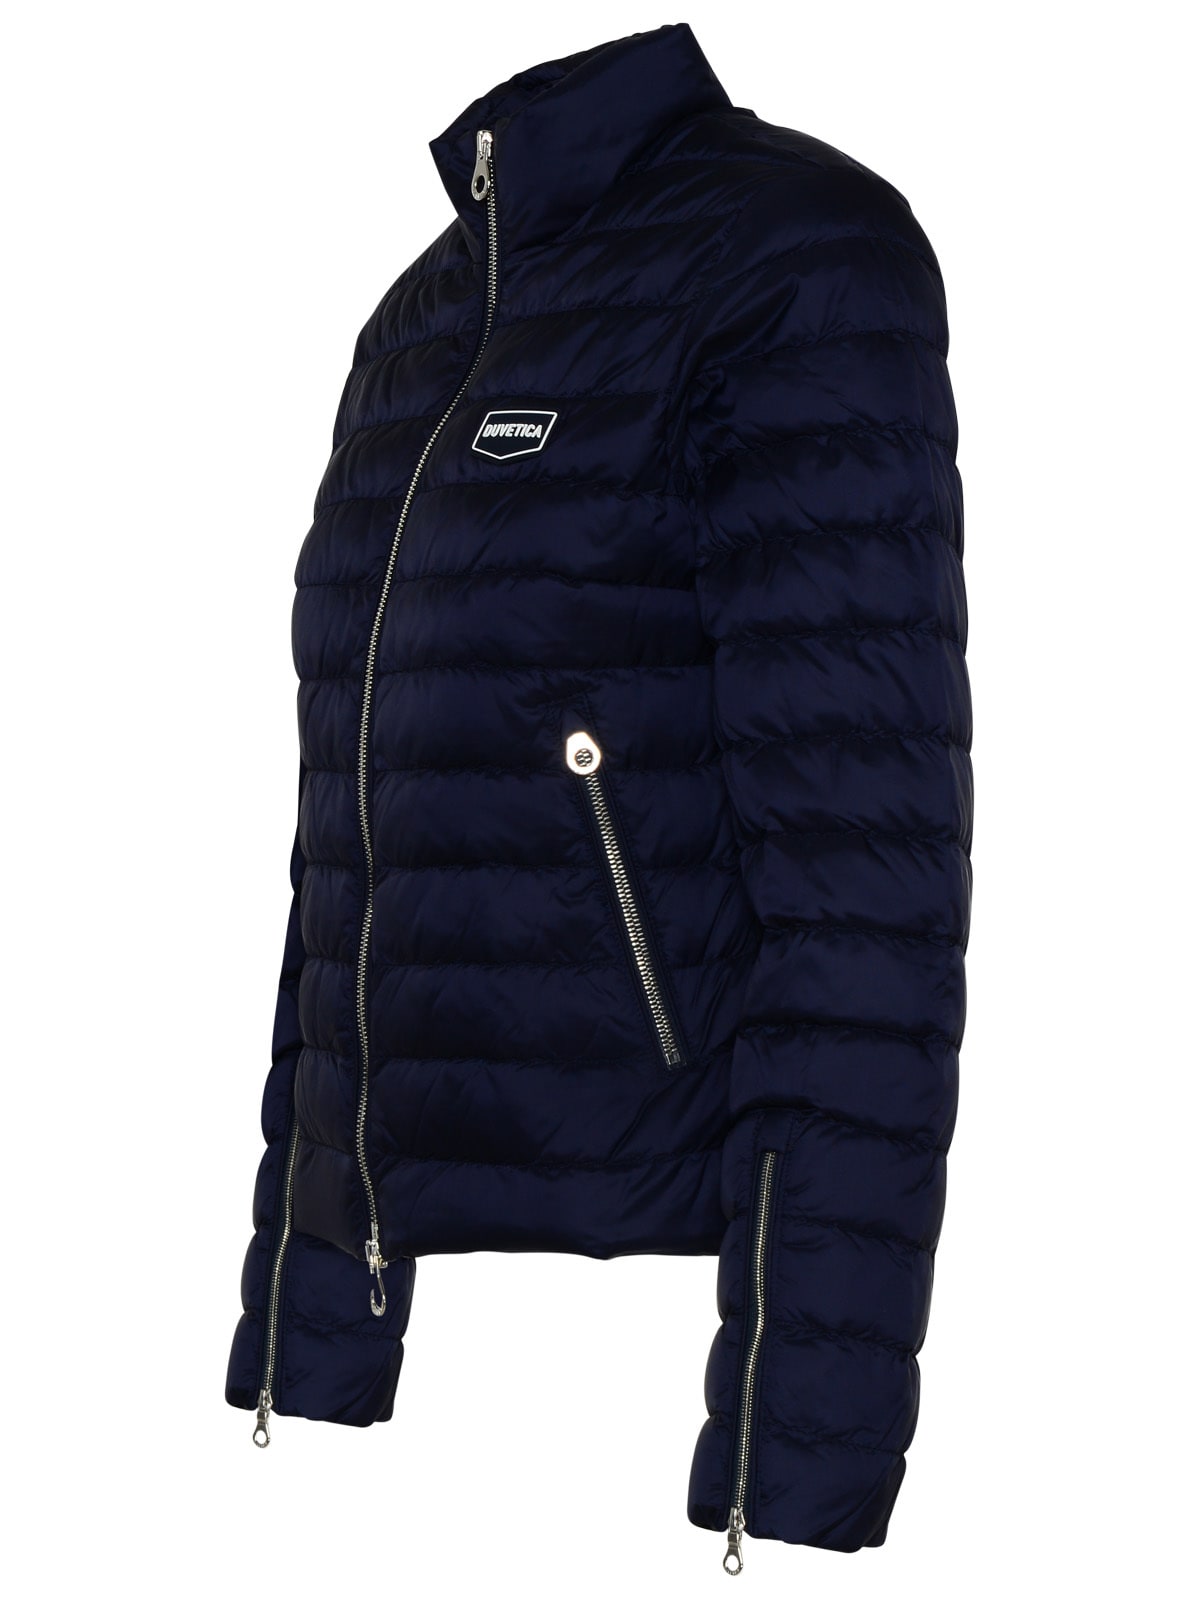 Shop Duvetica Bedonia Navy Polyamide Puffer Jacket In Nys